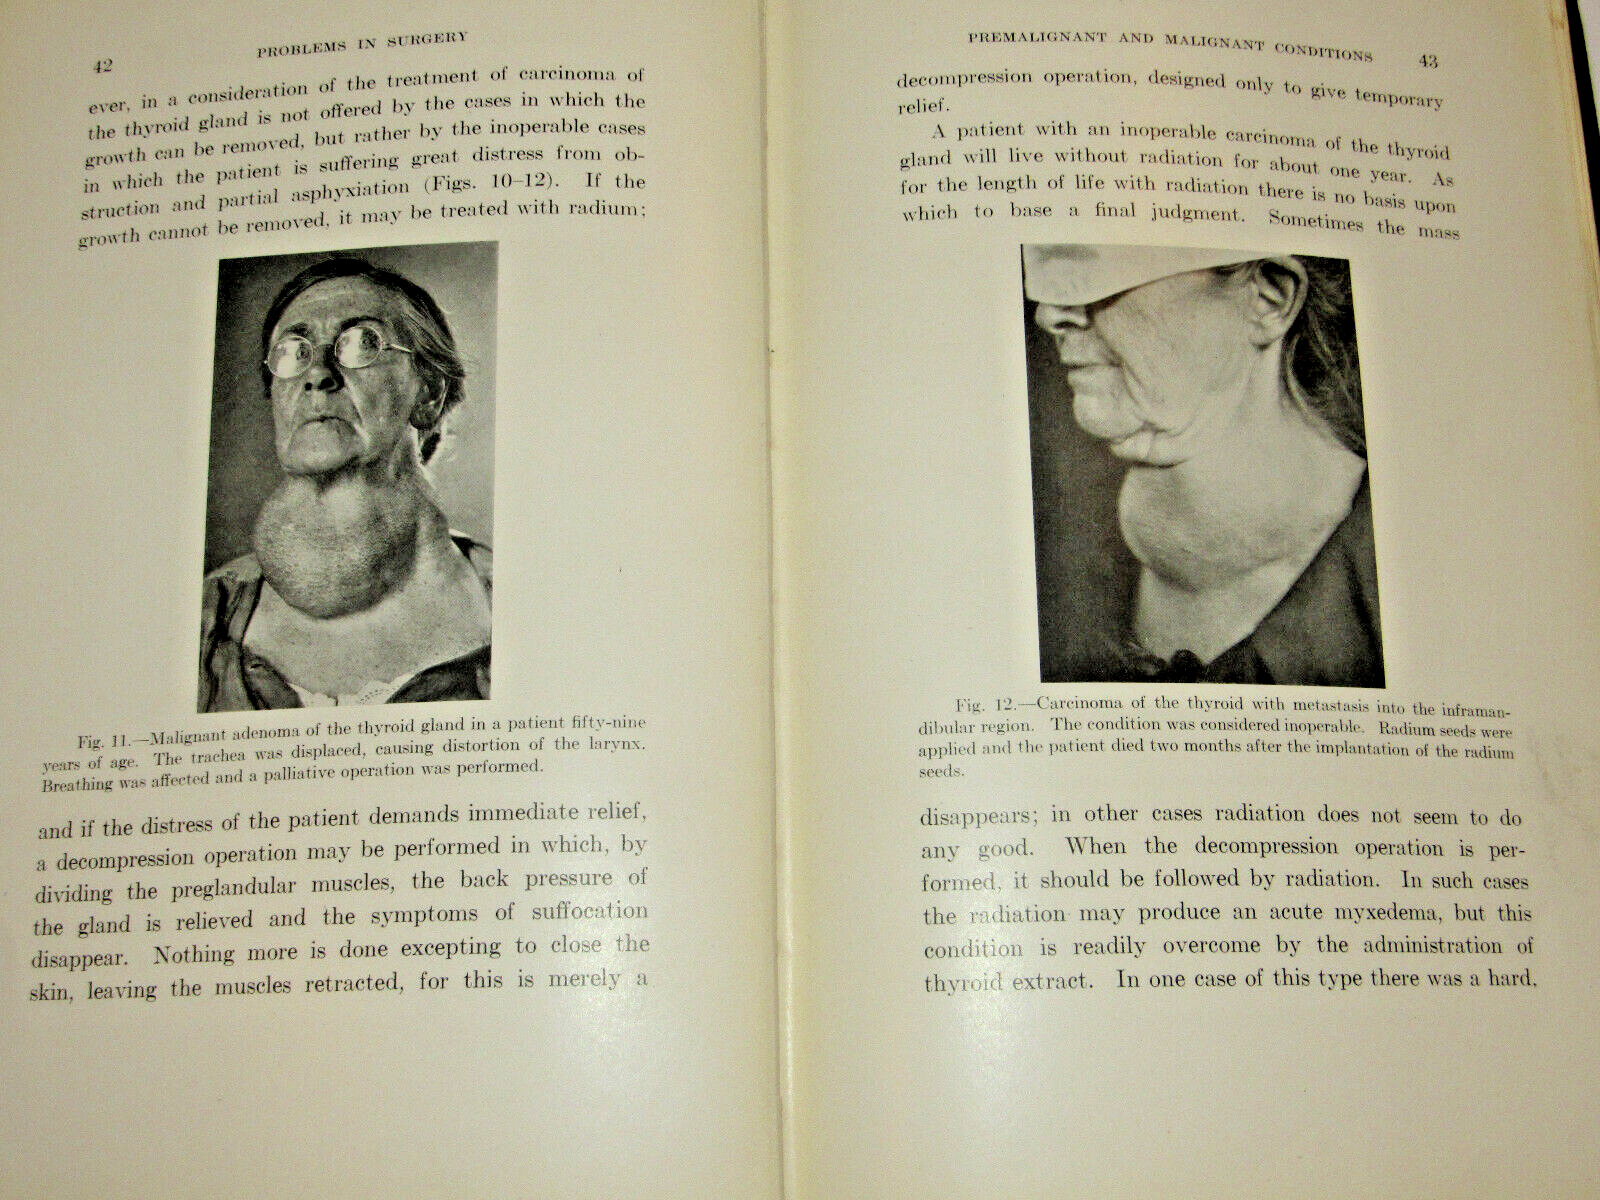 1928 'PROBLEMS IN SURGERY' BOOK GEORGE W CRILE, MD 49 ILLUSTRATIONS LECTURES